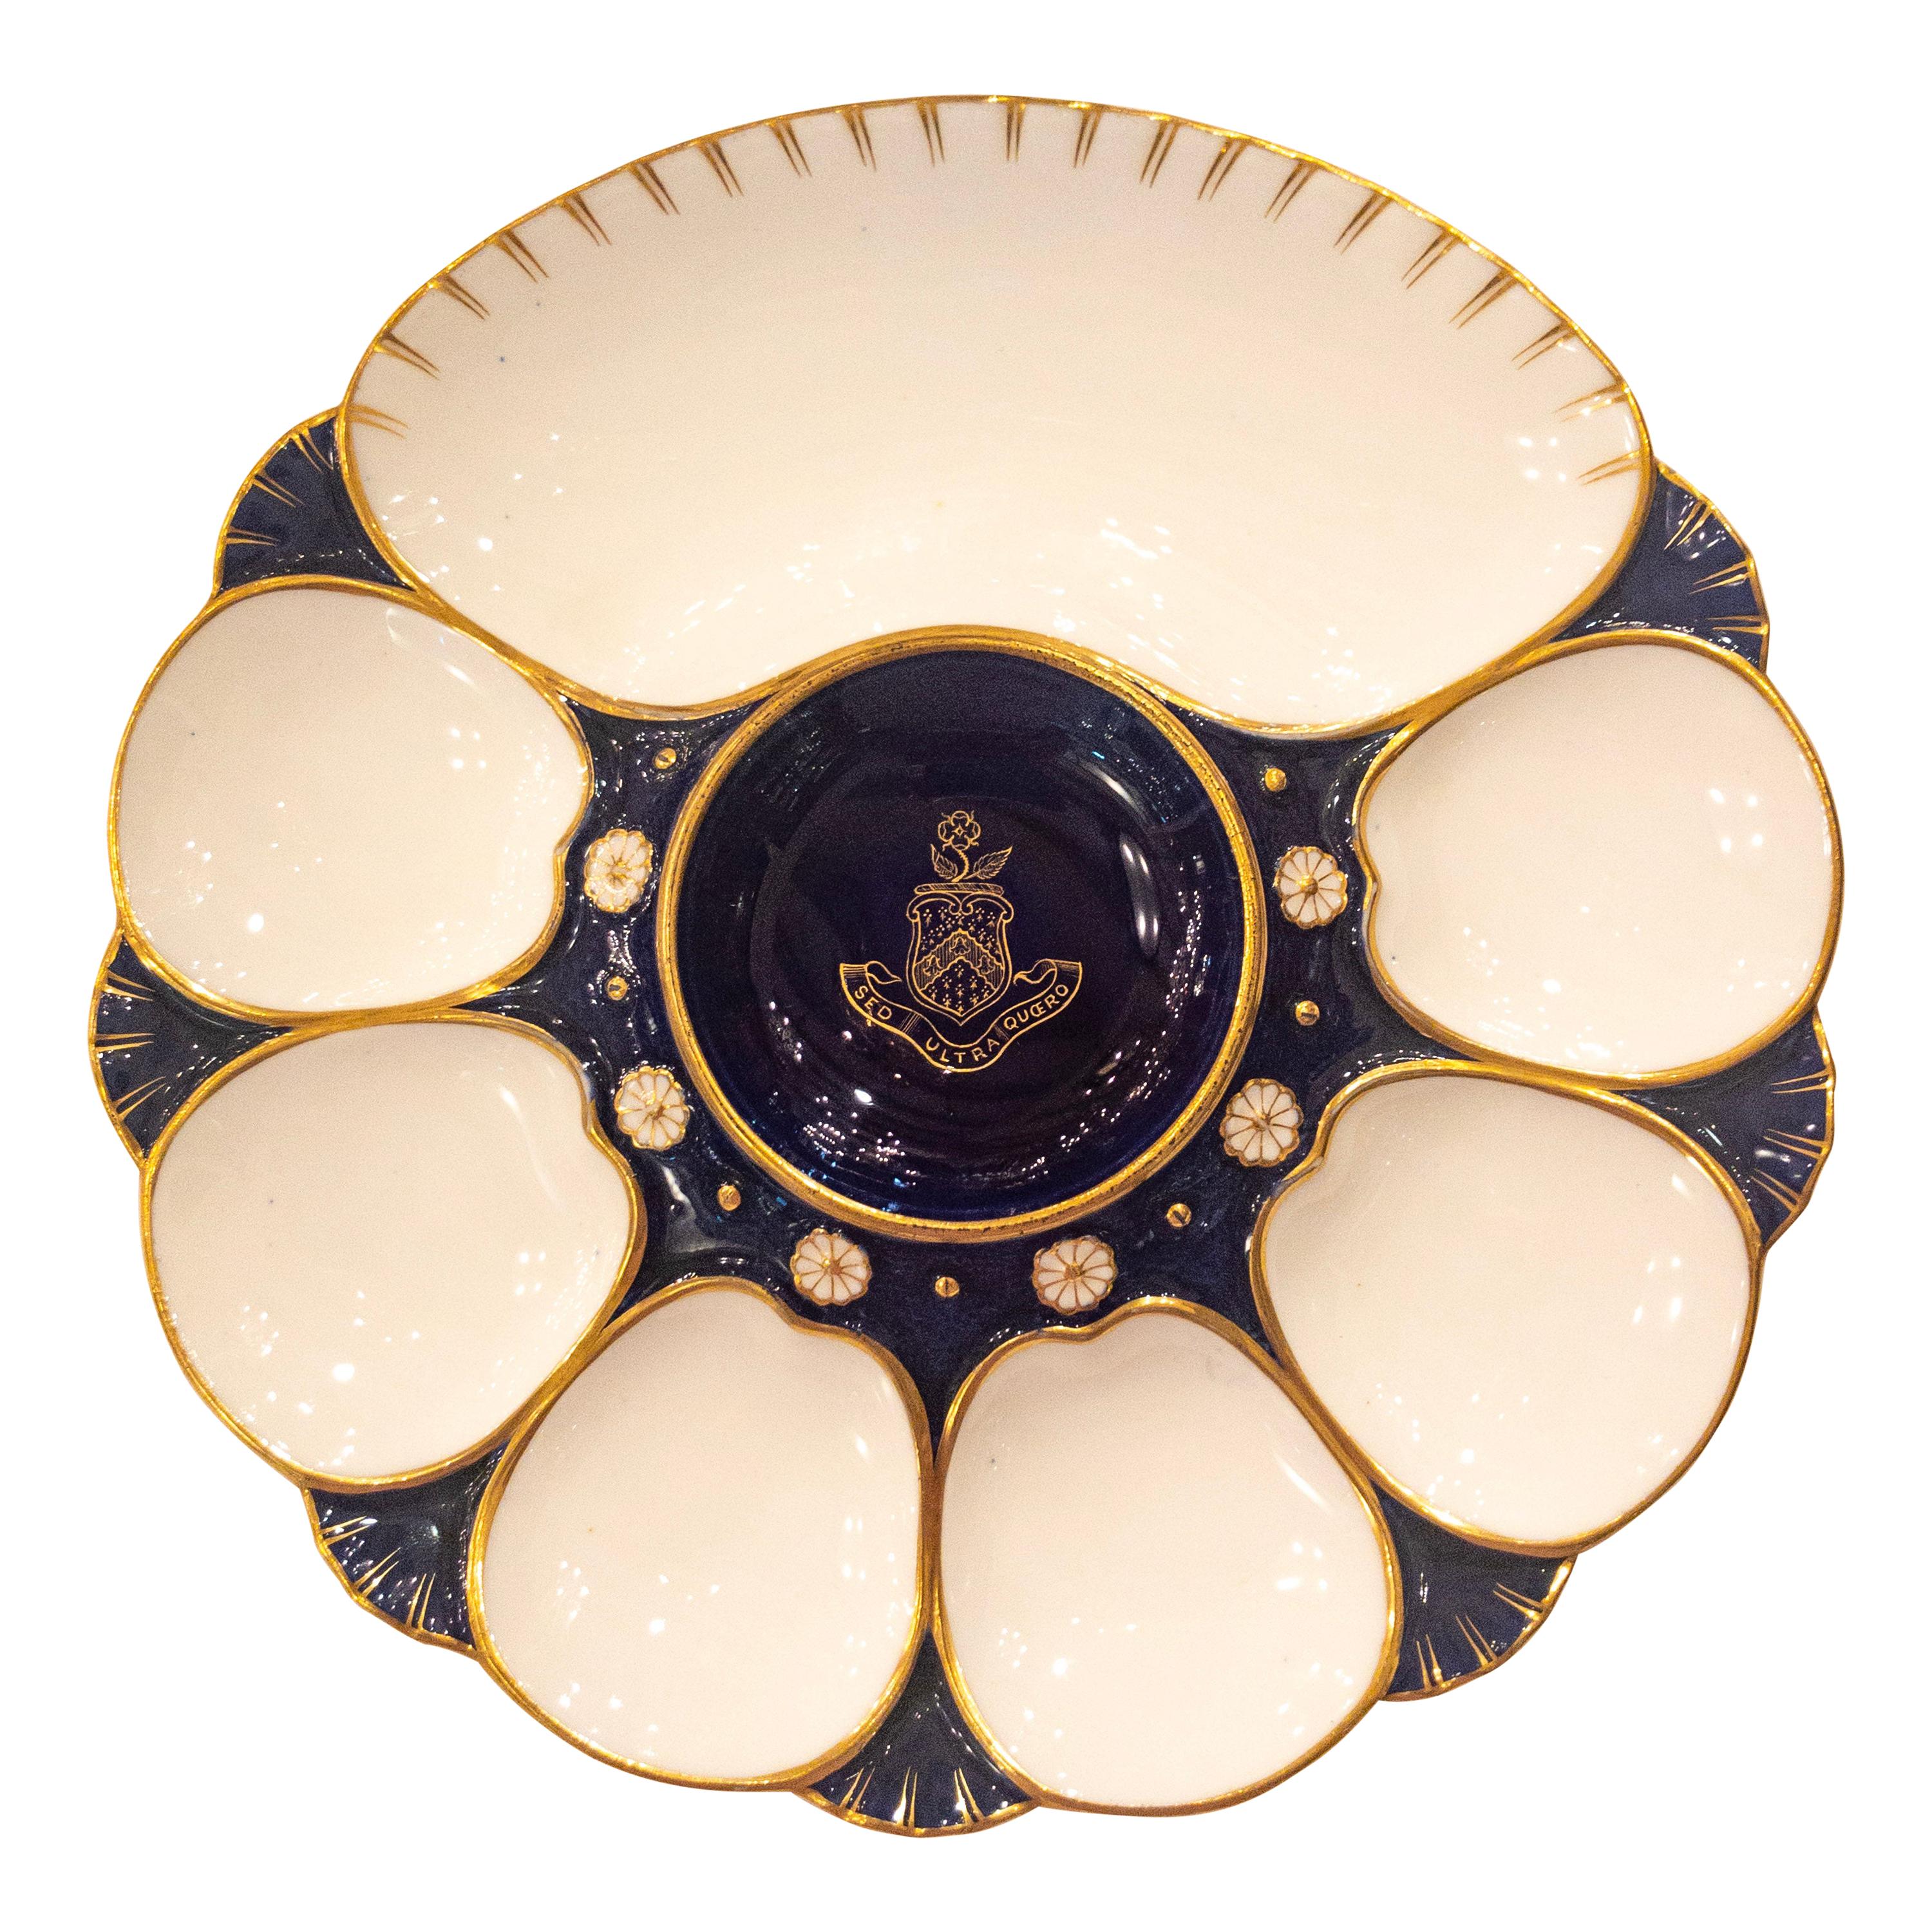 Rare Antique English Minton Oyster Plate with Latin Crest and Large Cracker Well